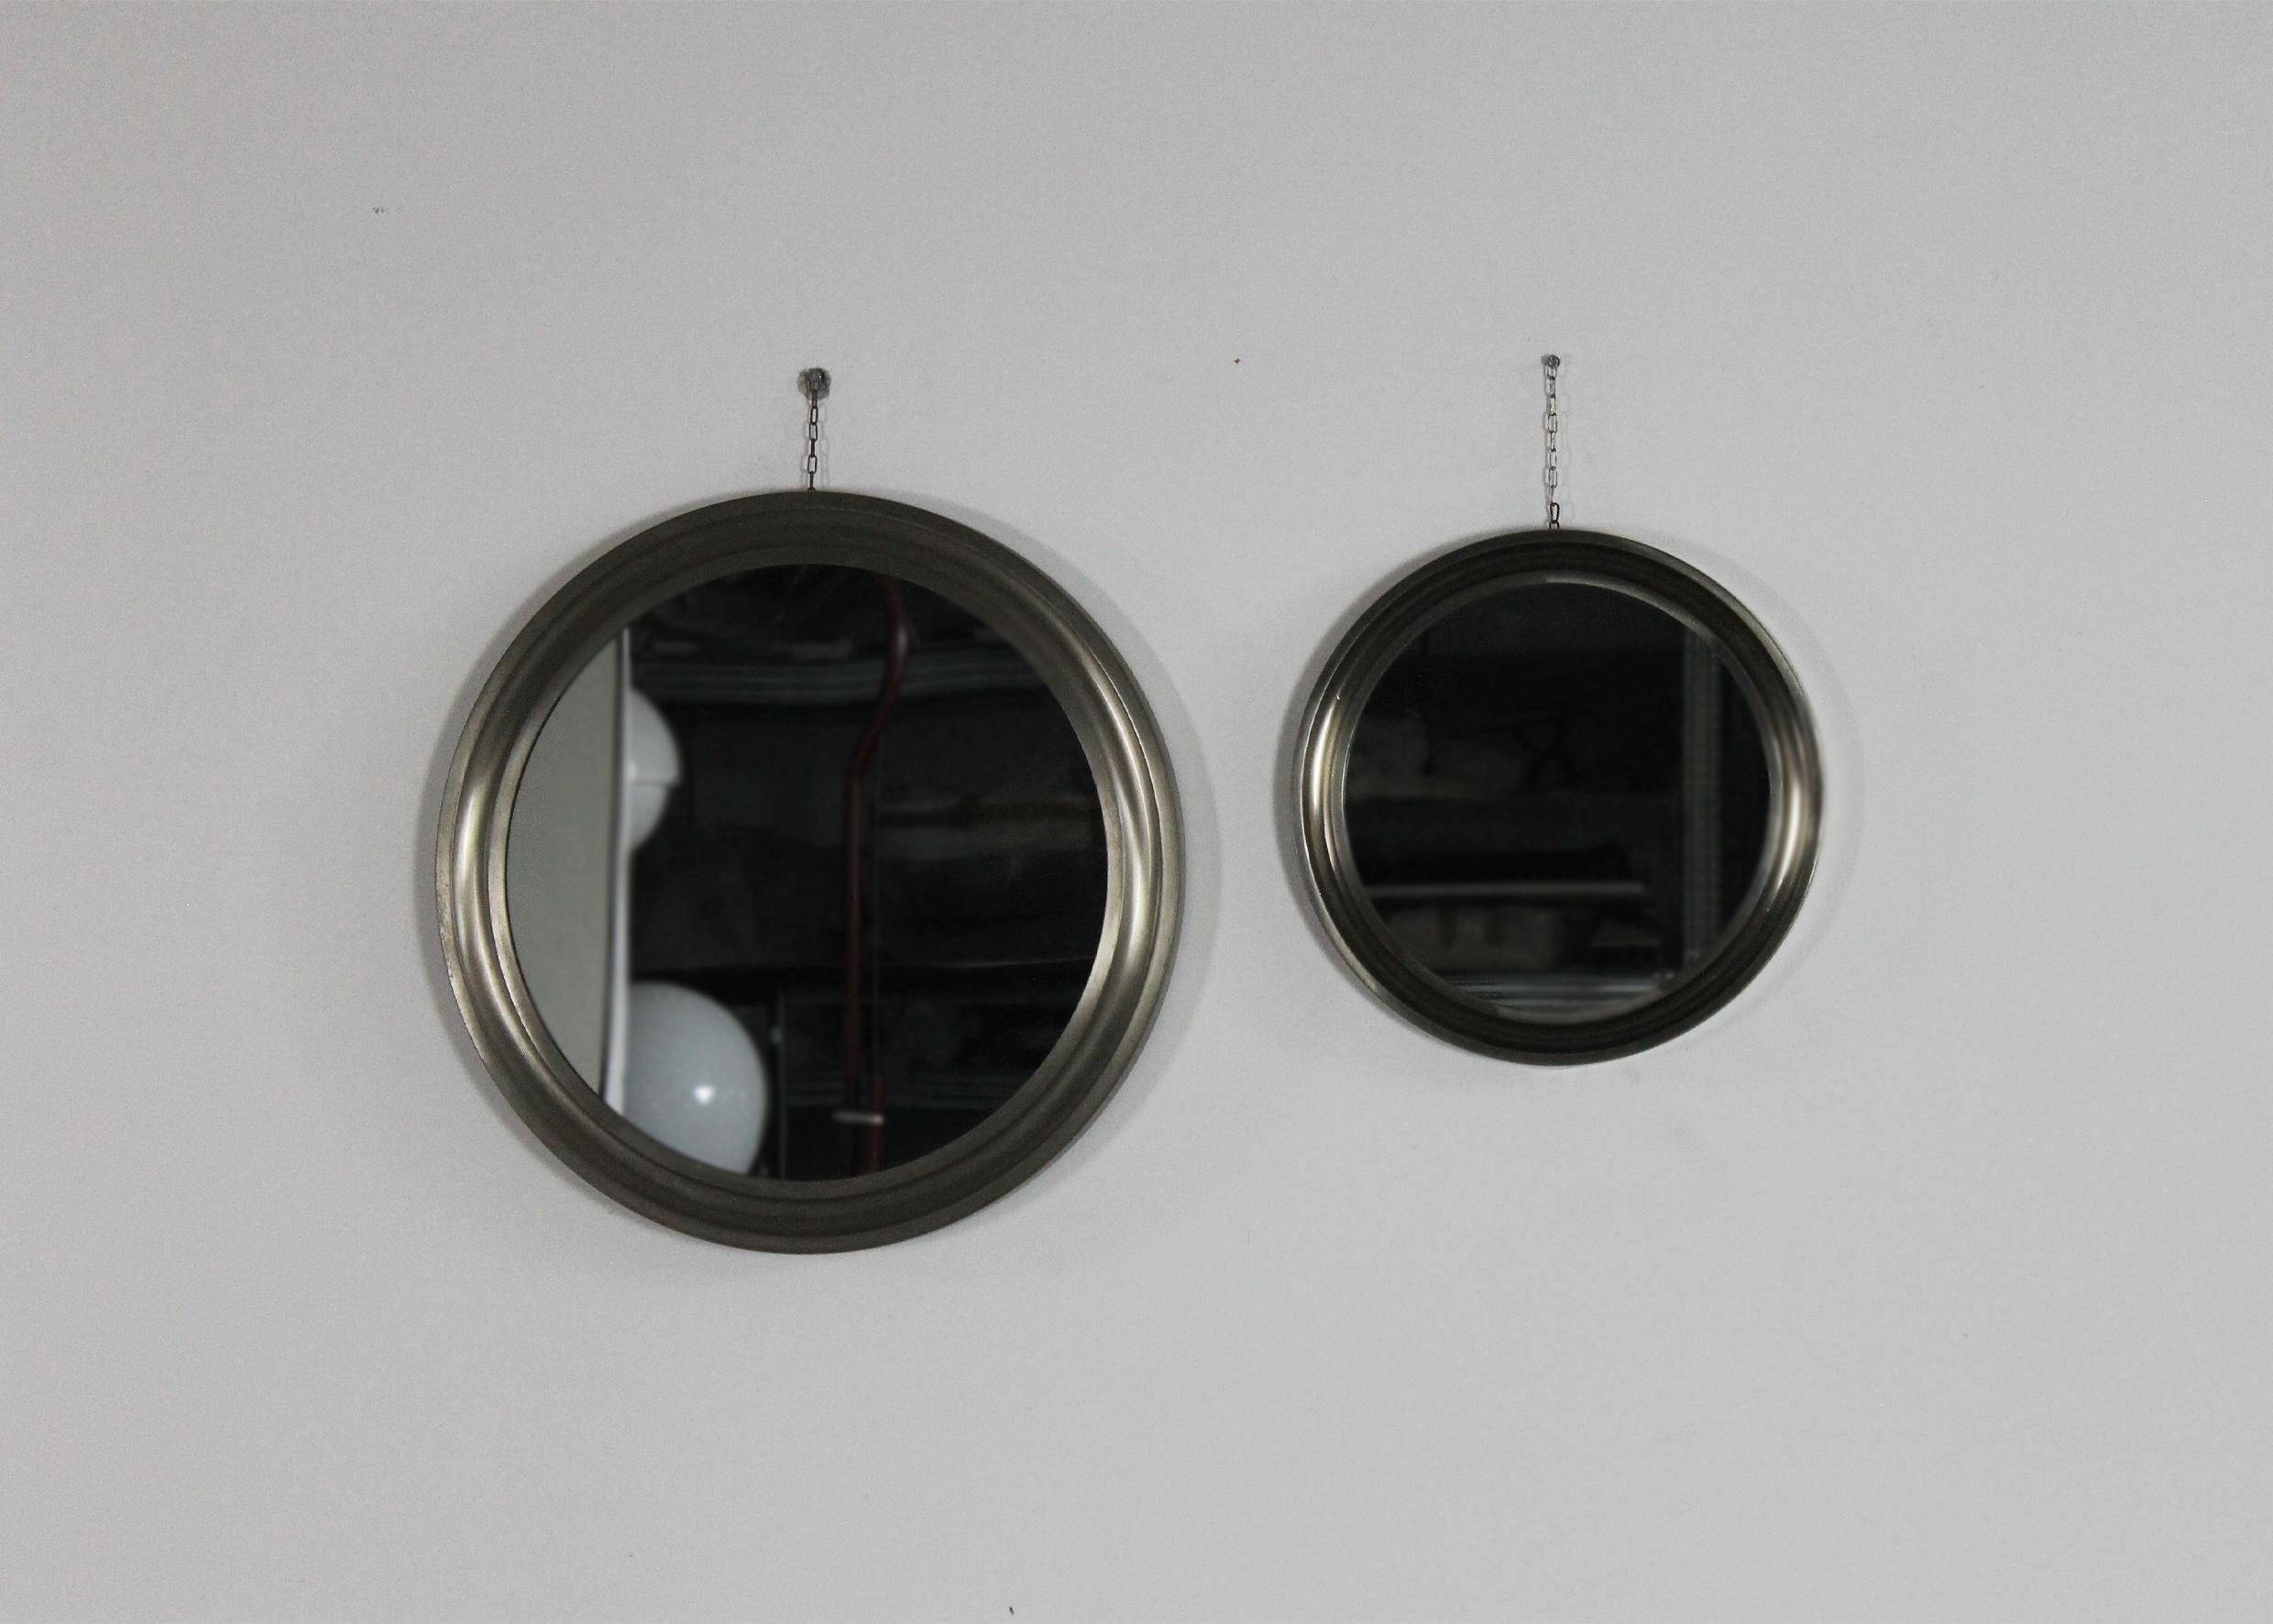 Sergio Mazza Set of Two Narciso Wall Mirrors with Brass Frame by Artemide 1960s In Good Condition For Sale In Montecatini Terme, IT